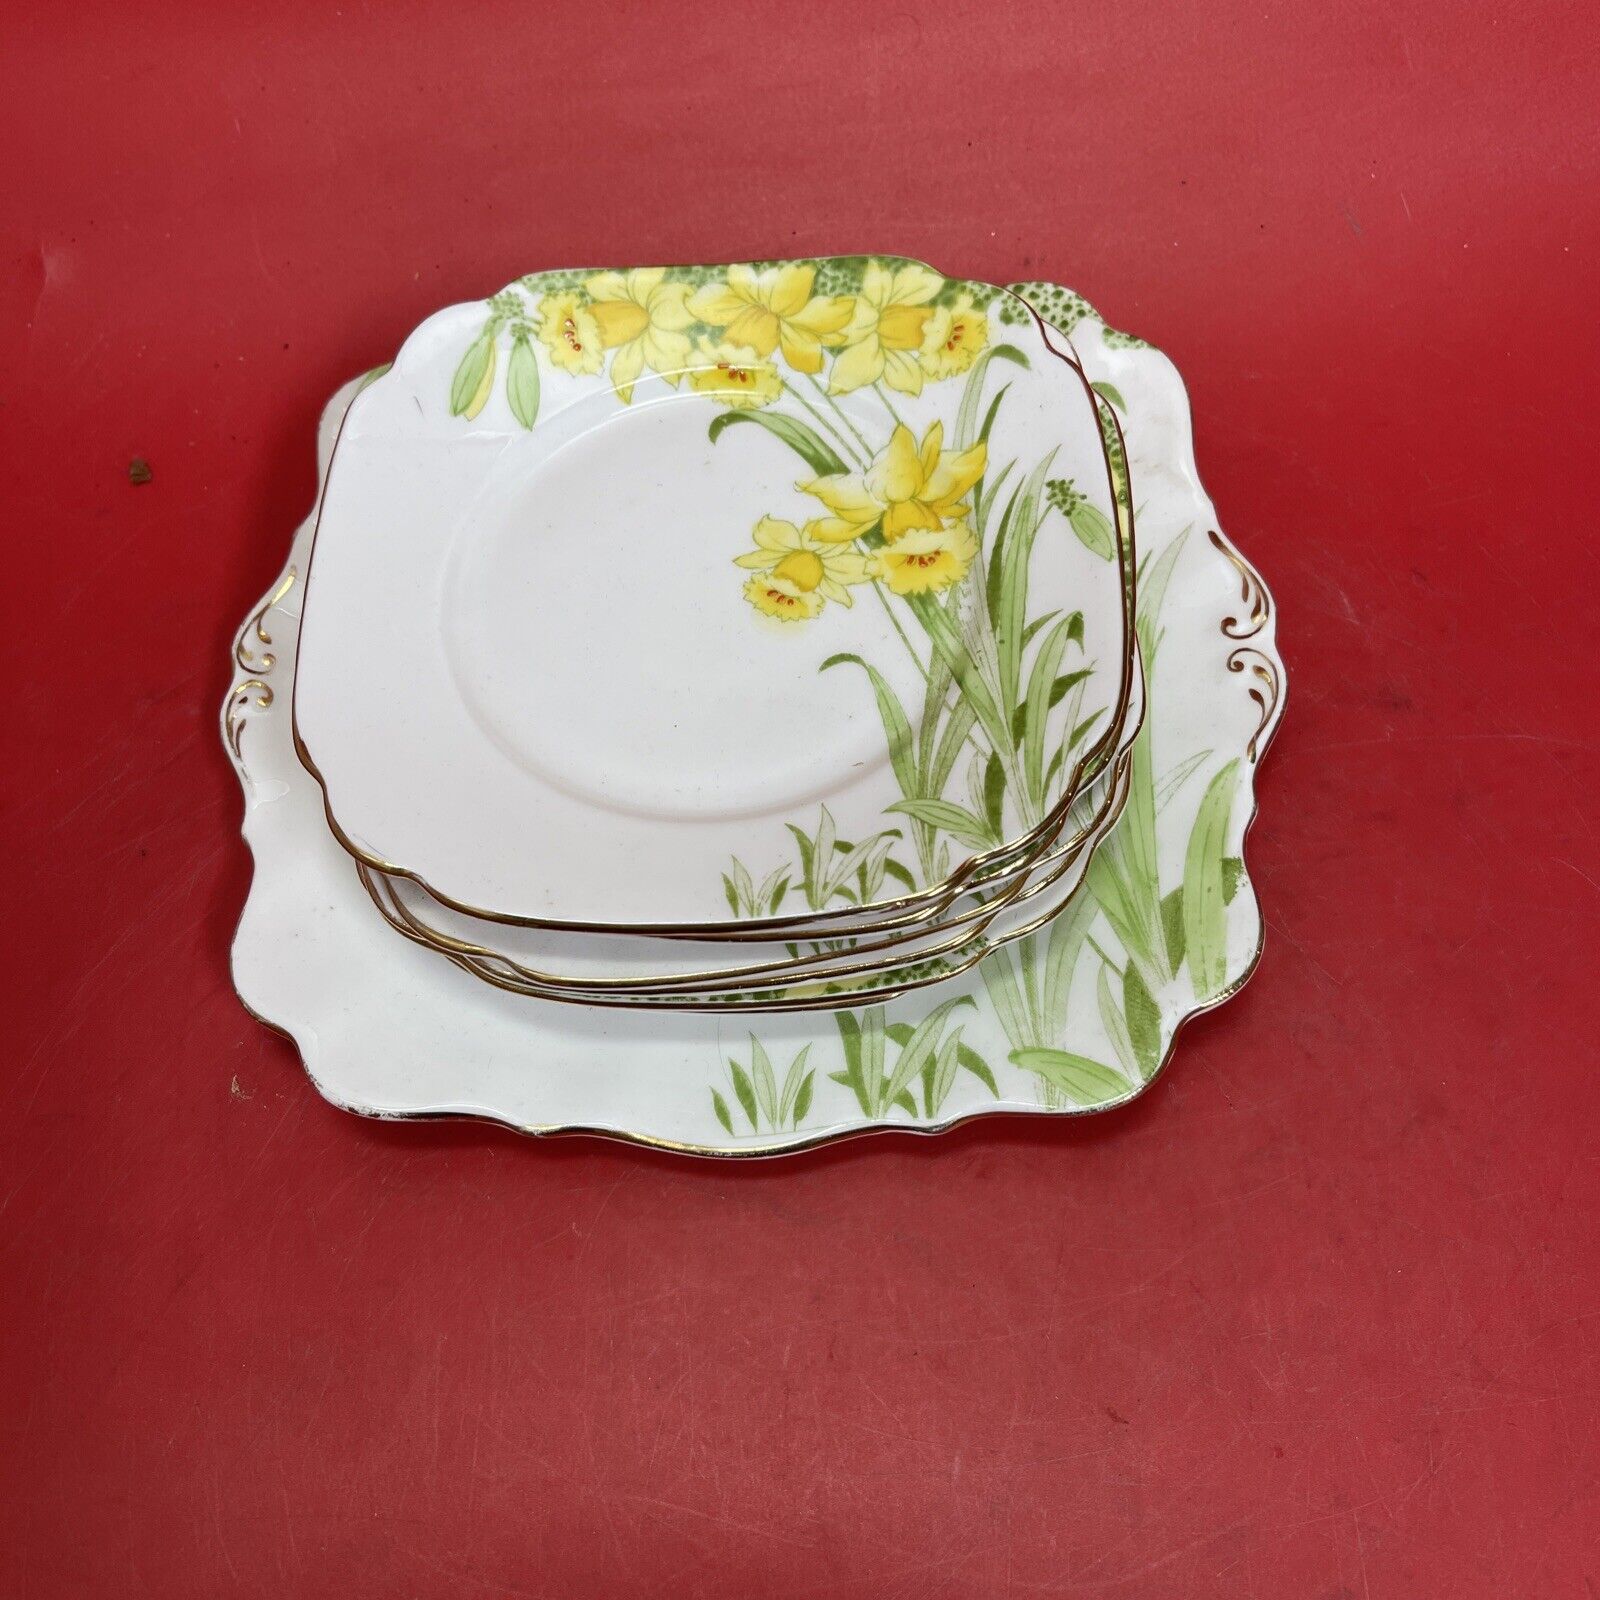 Vintage Golden Gleam Royal Standard Fine China Plate with Yellow Daffodils Lot 7